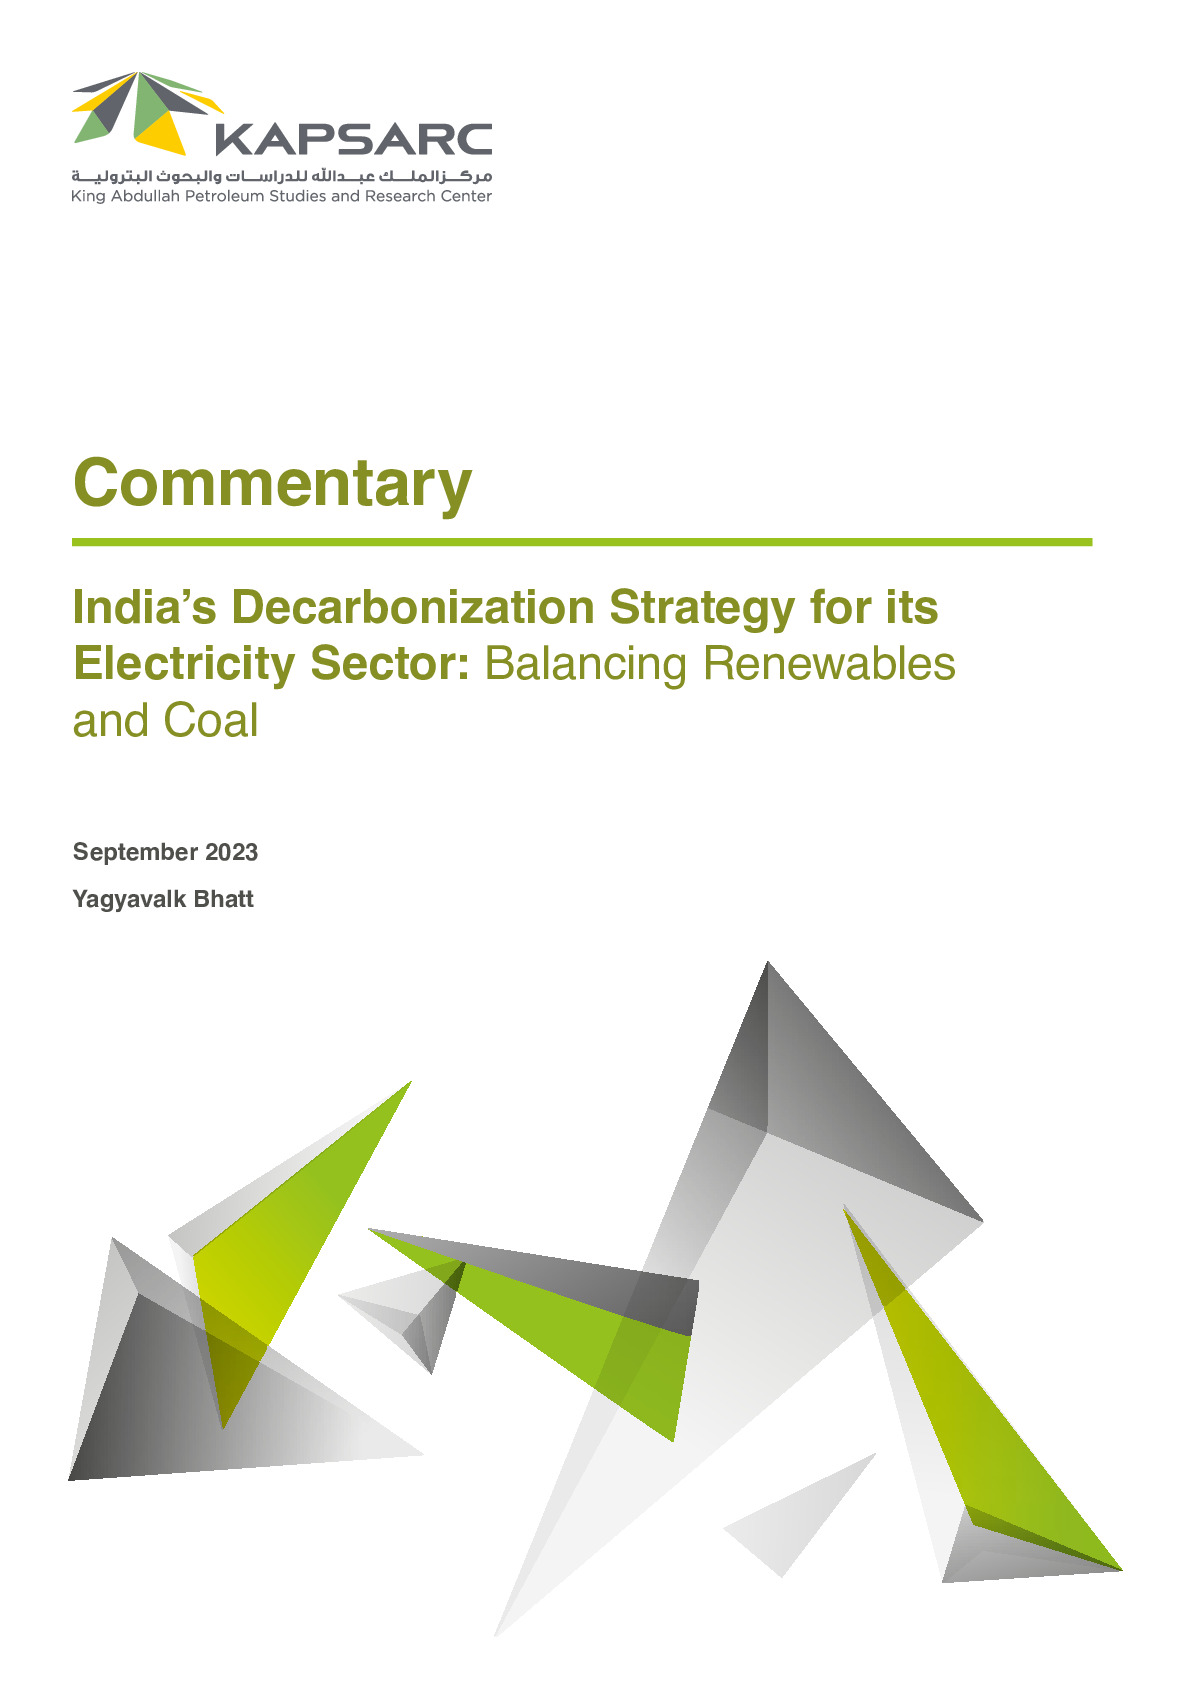 India’s Decarbonization Strategy for its Electricity Sector: Balancing Renewables and Coal